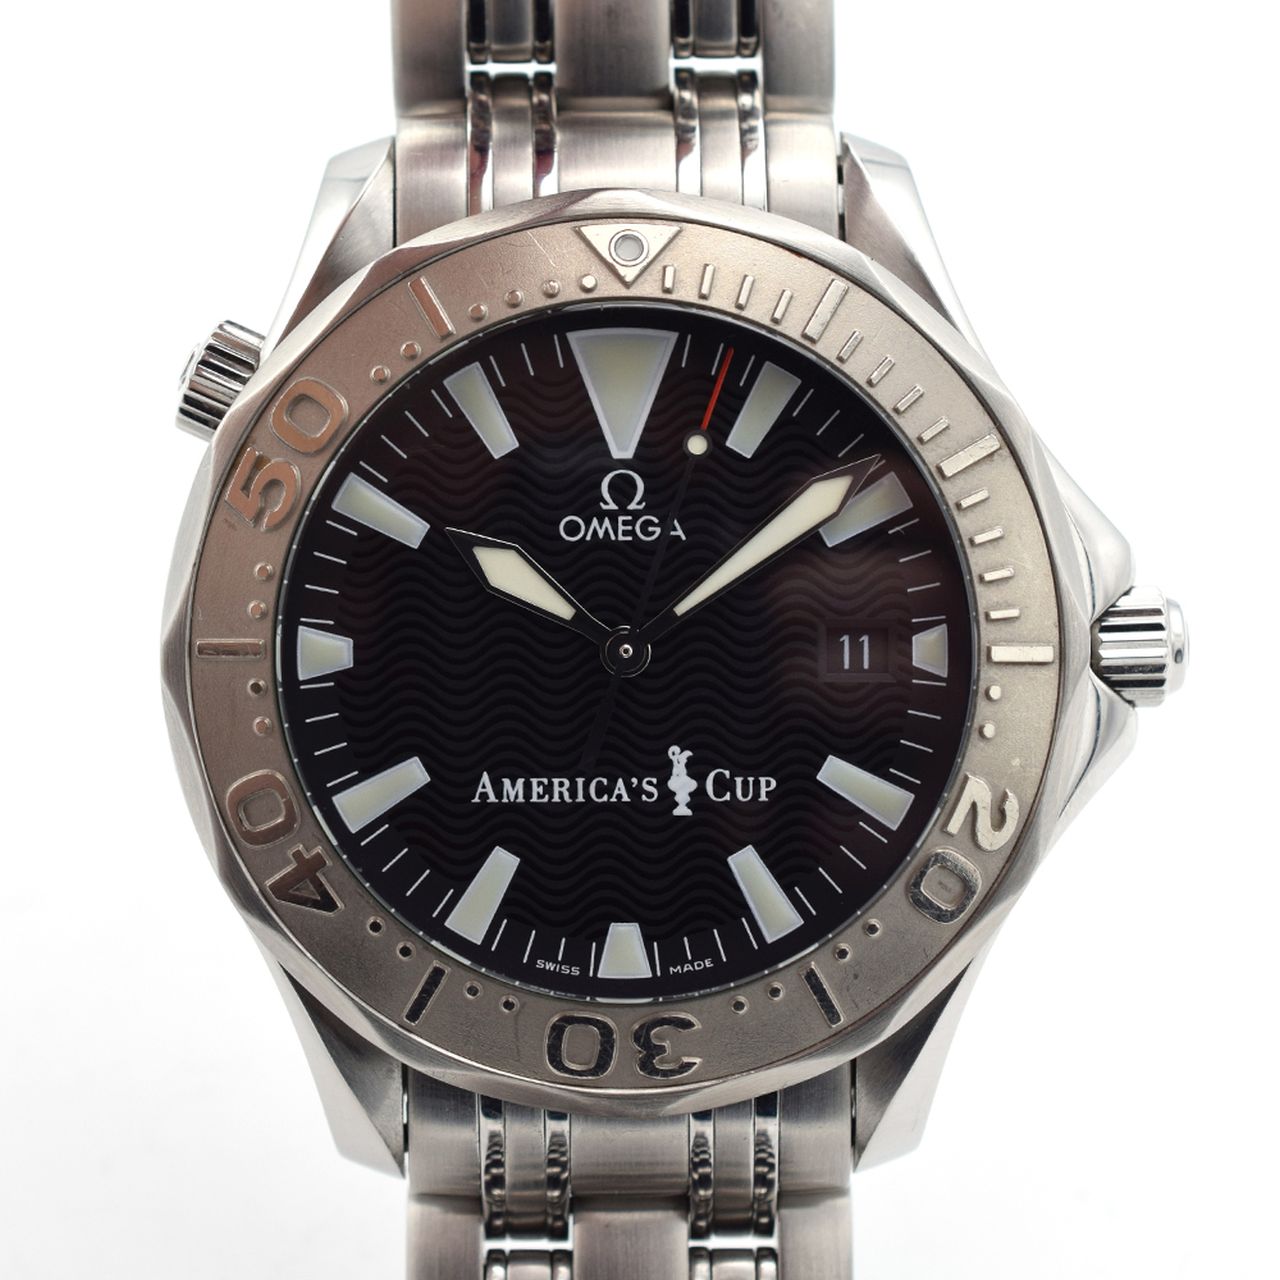 GENTLEMAN'S OMEGA SEAMASTER AMERICA'S CUP 300M LIMITED EDITION, 2533.50.00, CIRCA. 2000/02, 41MM - Image 6 of 9